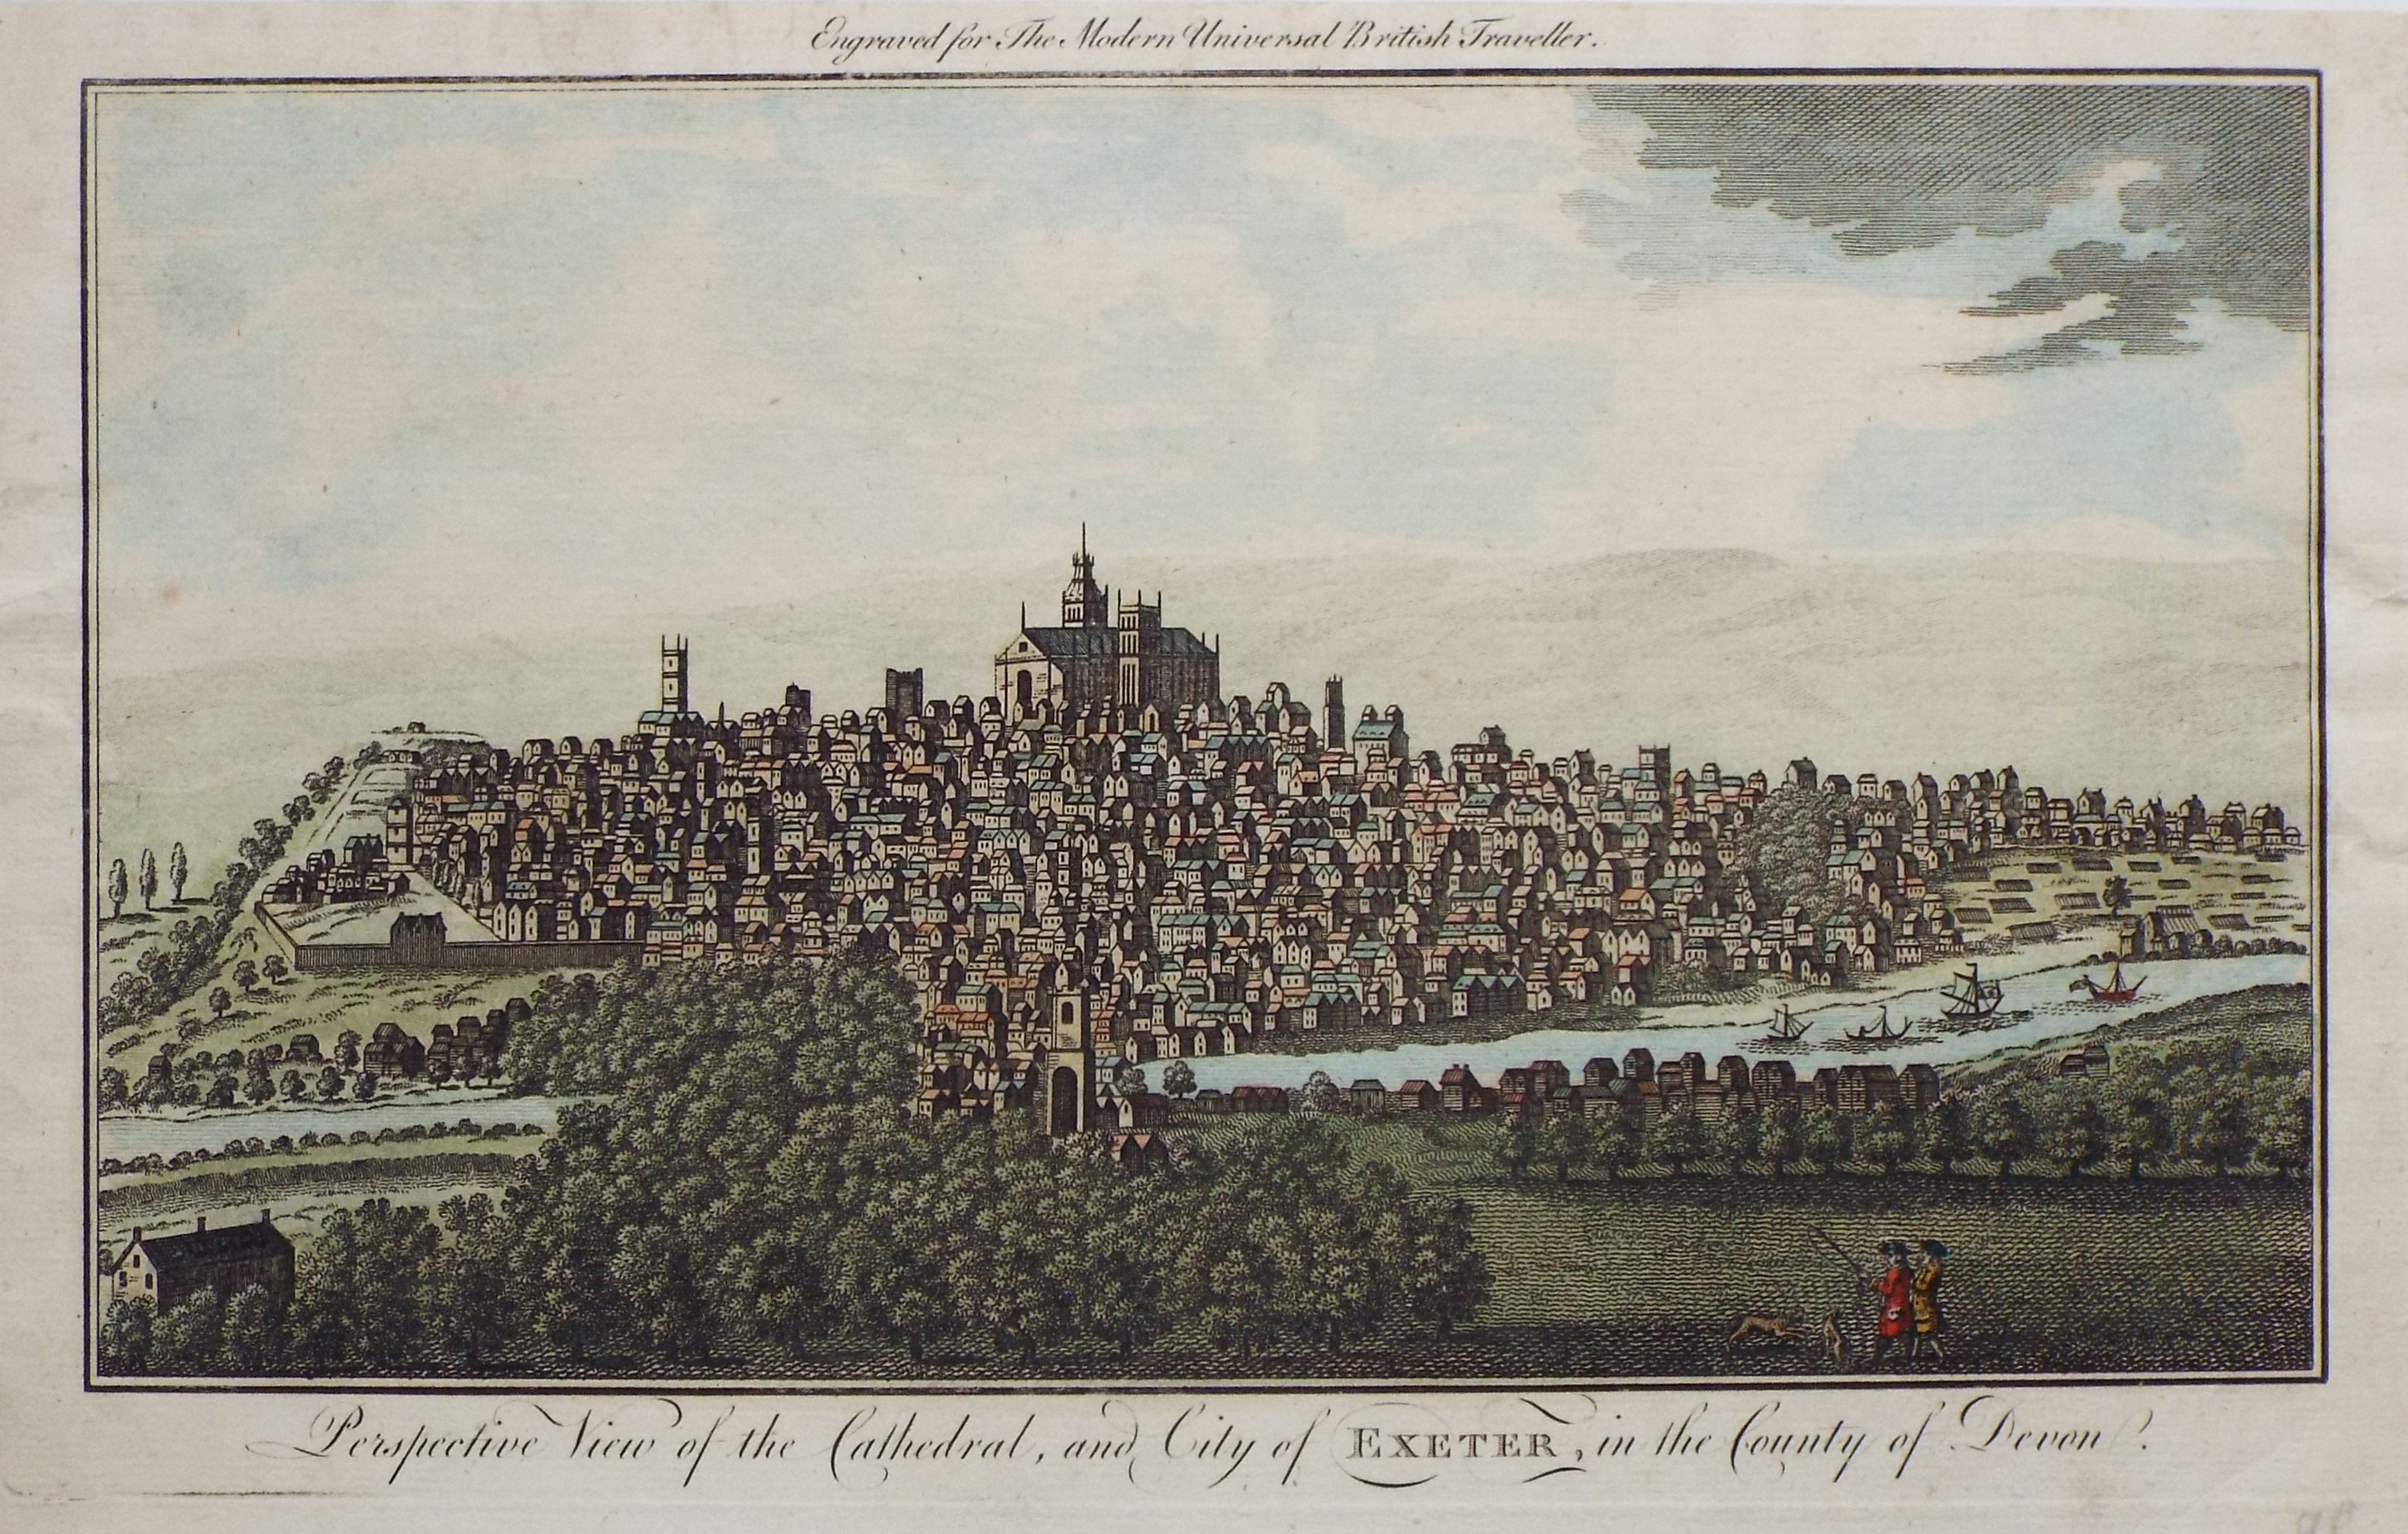 Print - Perspective View of the Cathedral and City of Exeter in the County of Devon